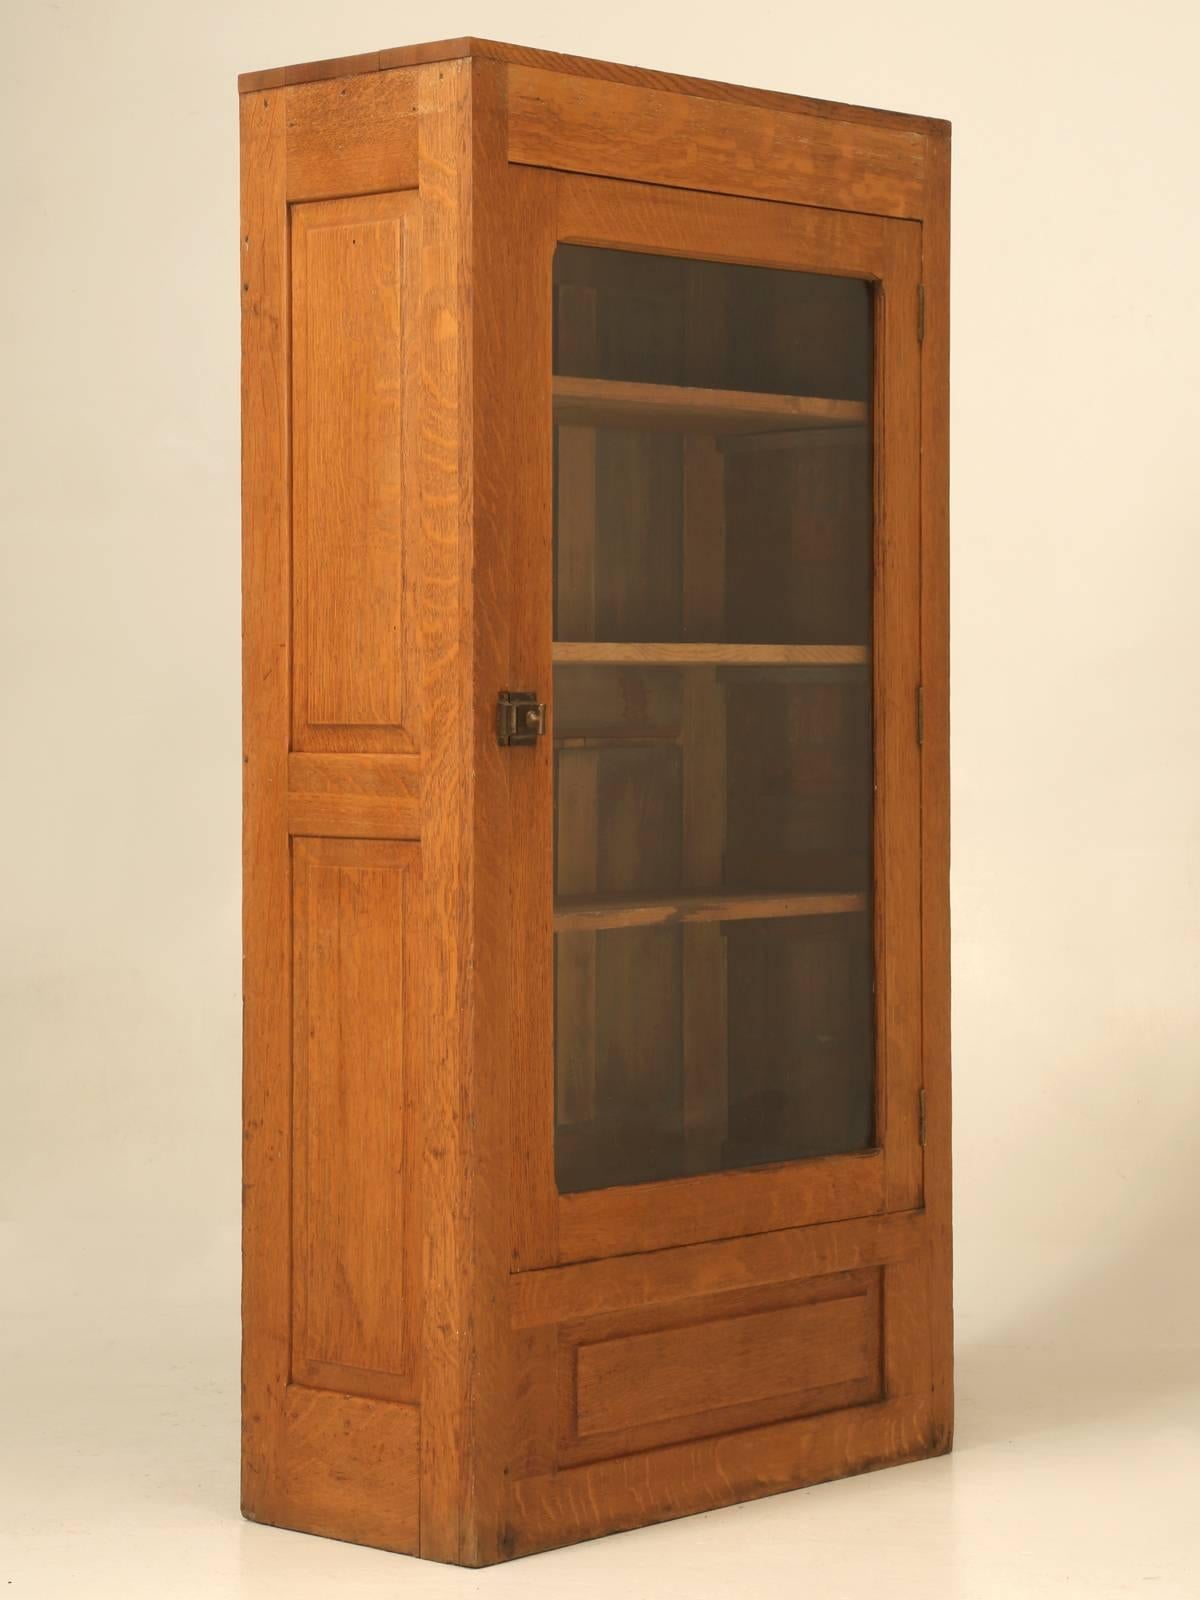 Antique American Oak bookcase, or Cabinet that appears to have been made in the early 1900s and does not appear to have been restored. We took steel wool to the old finish and applied a couple of coats of beeswax and left the original patina as is.